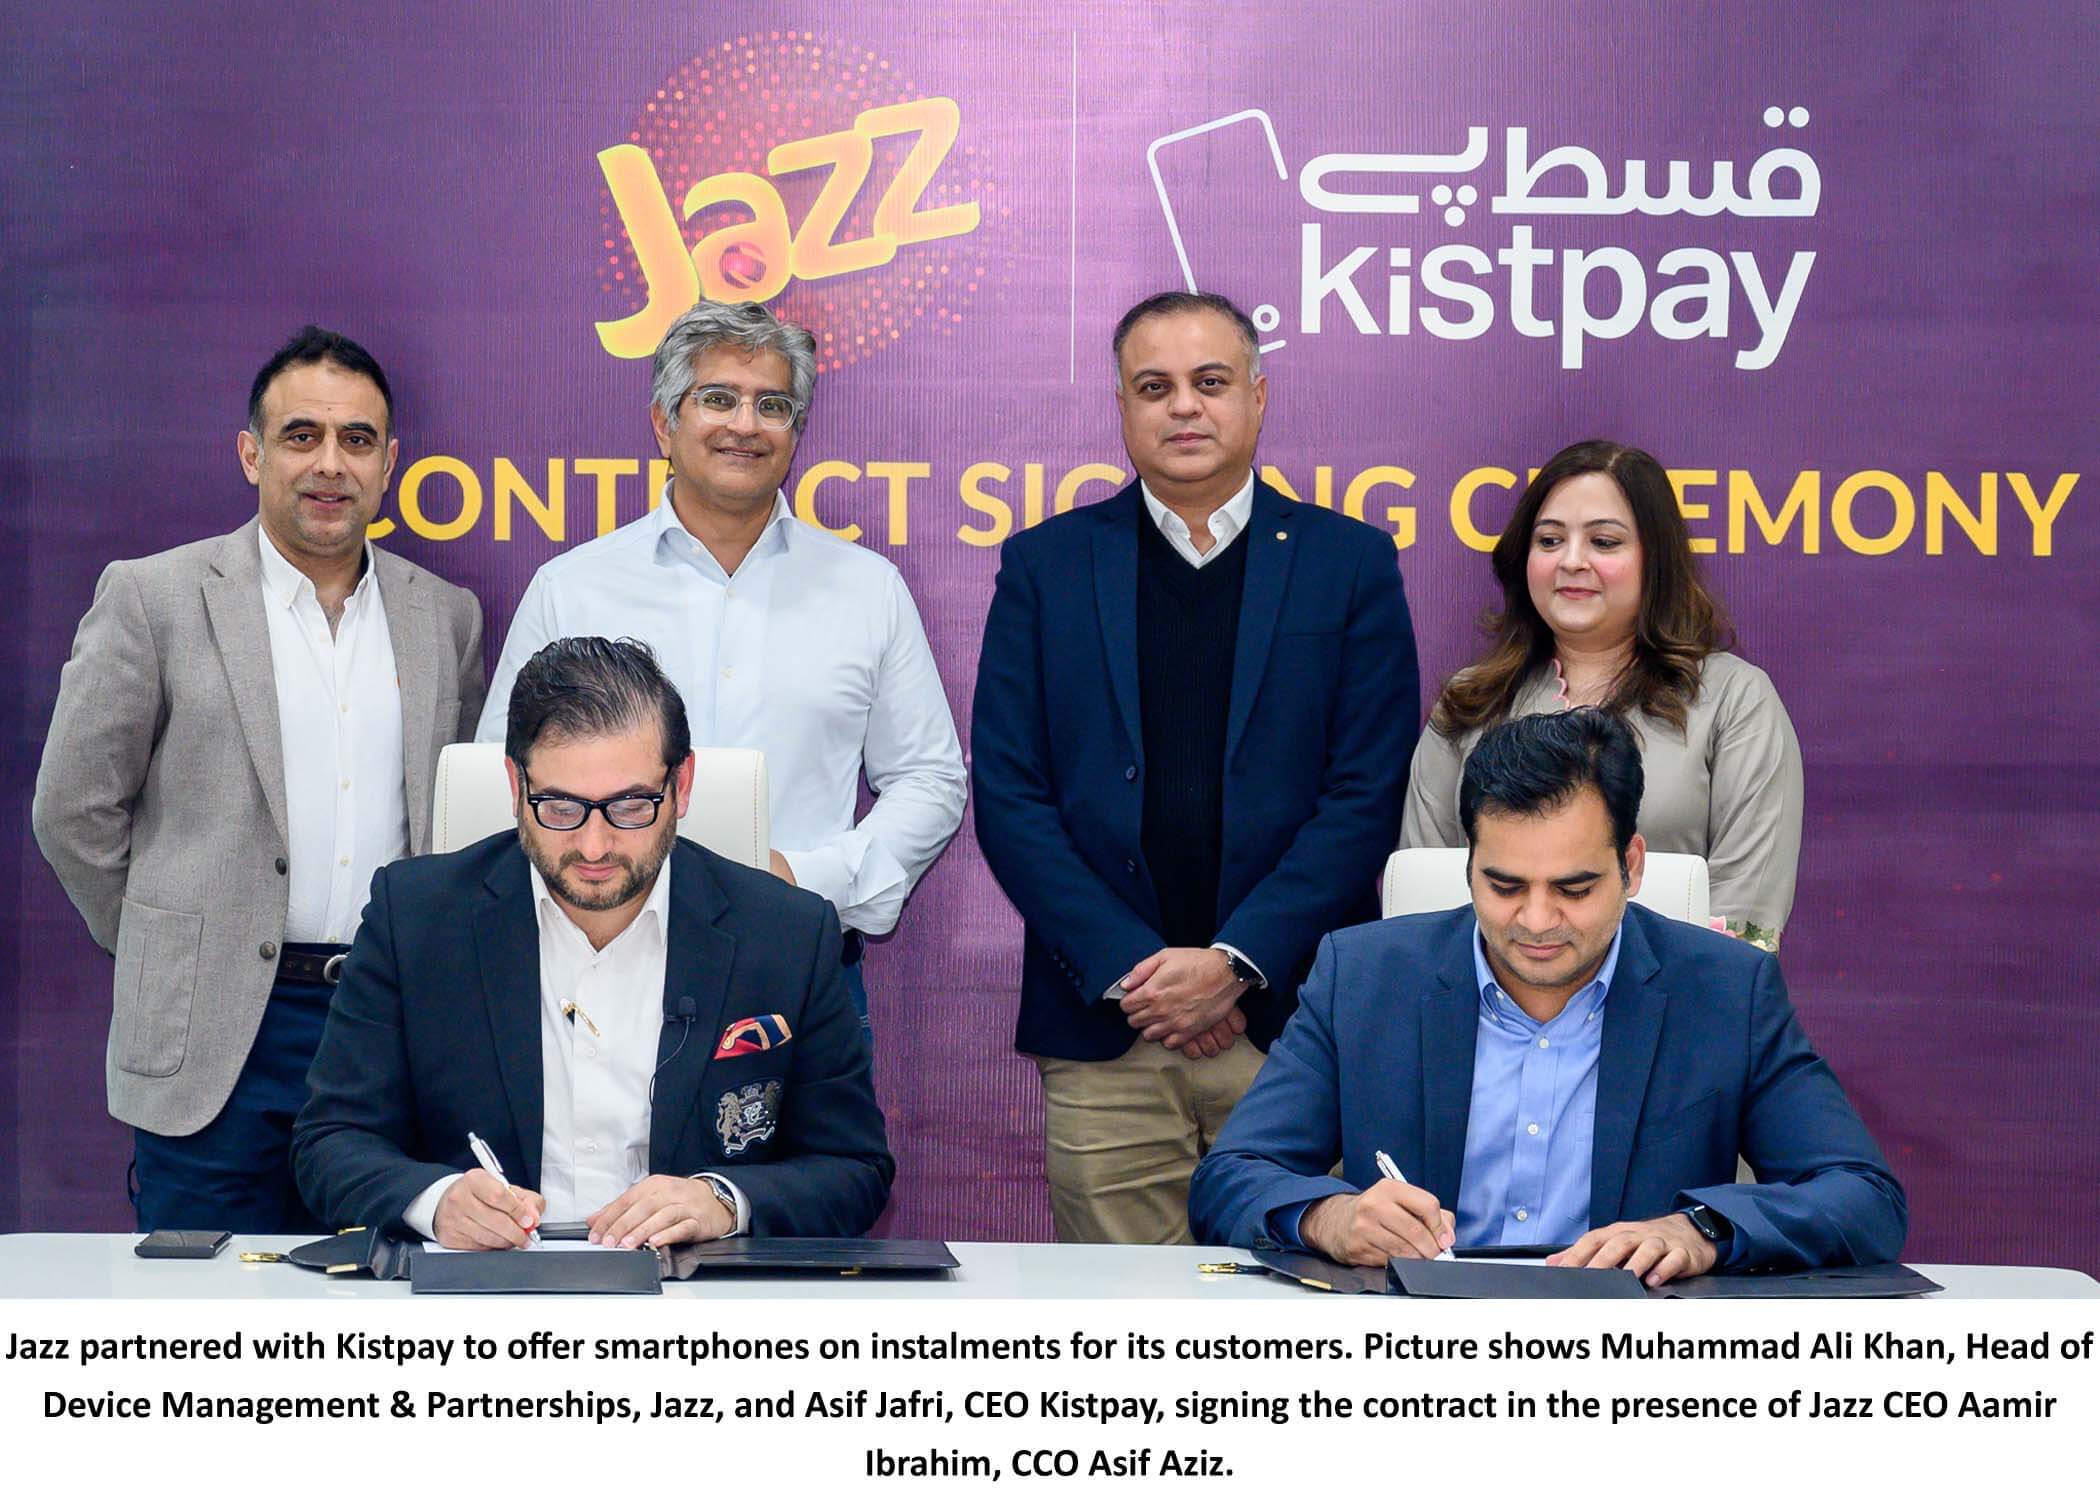 Jazz partners with Kistpay to provide affordable smartphones with easy installments